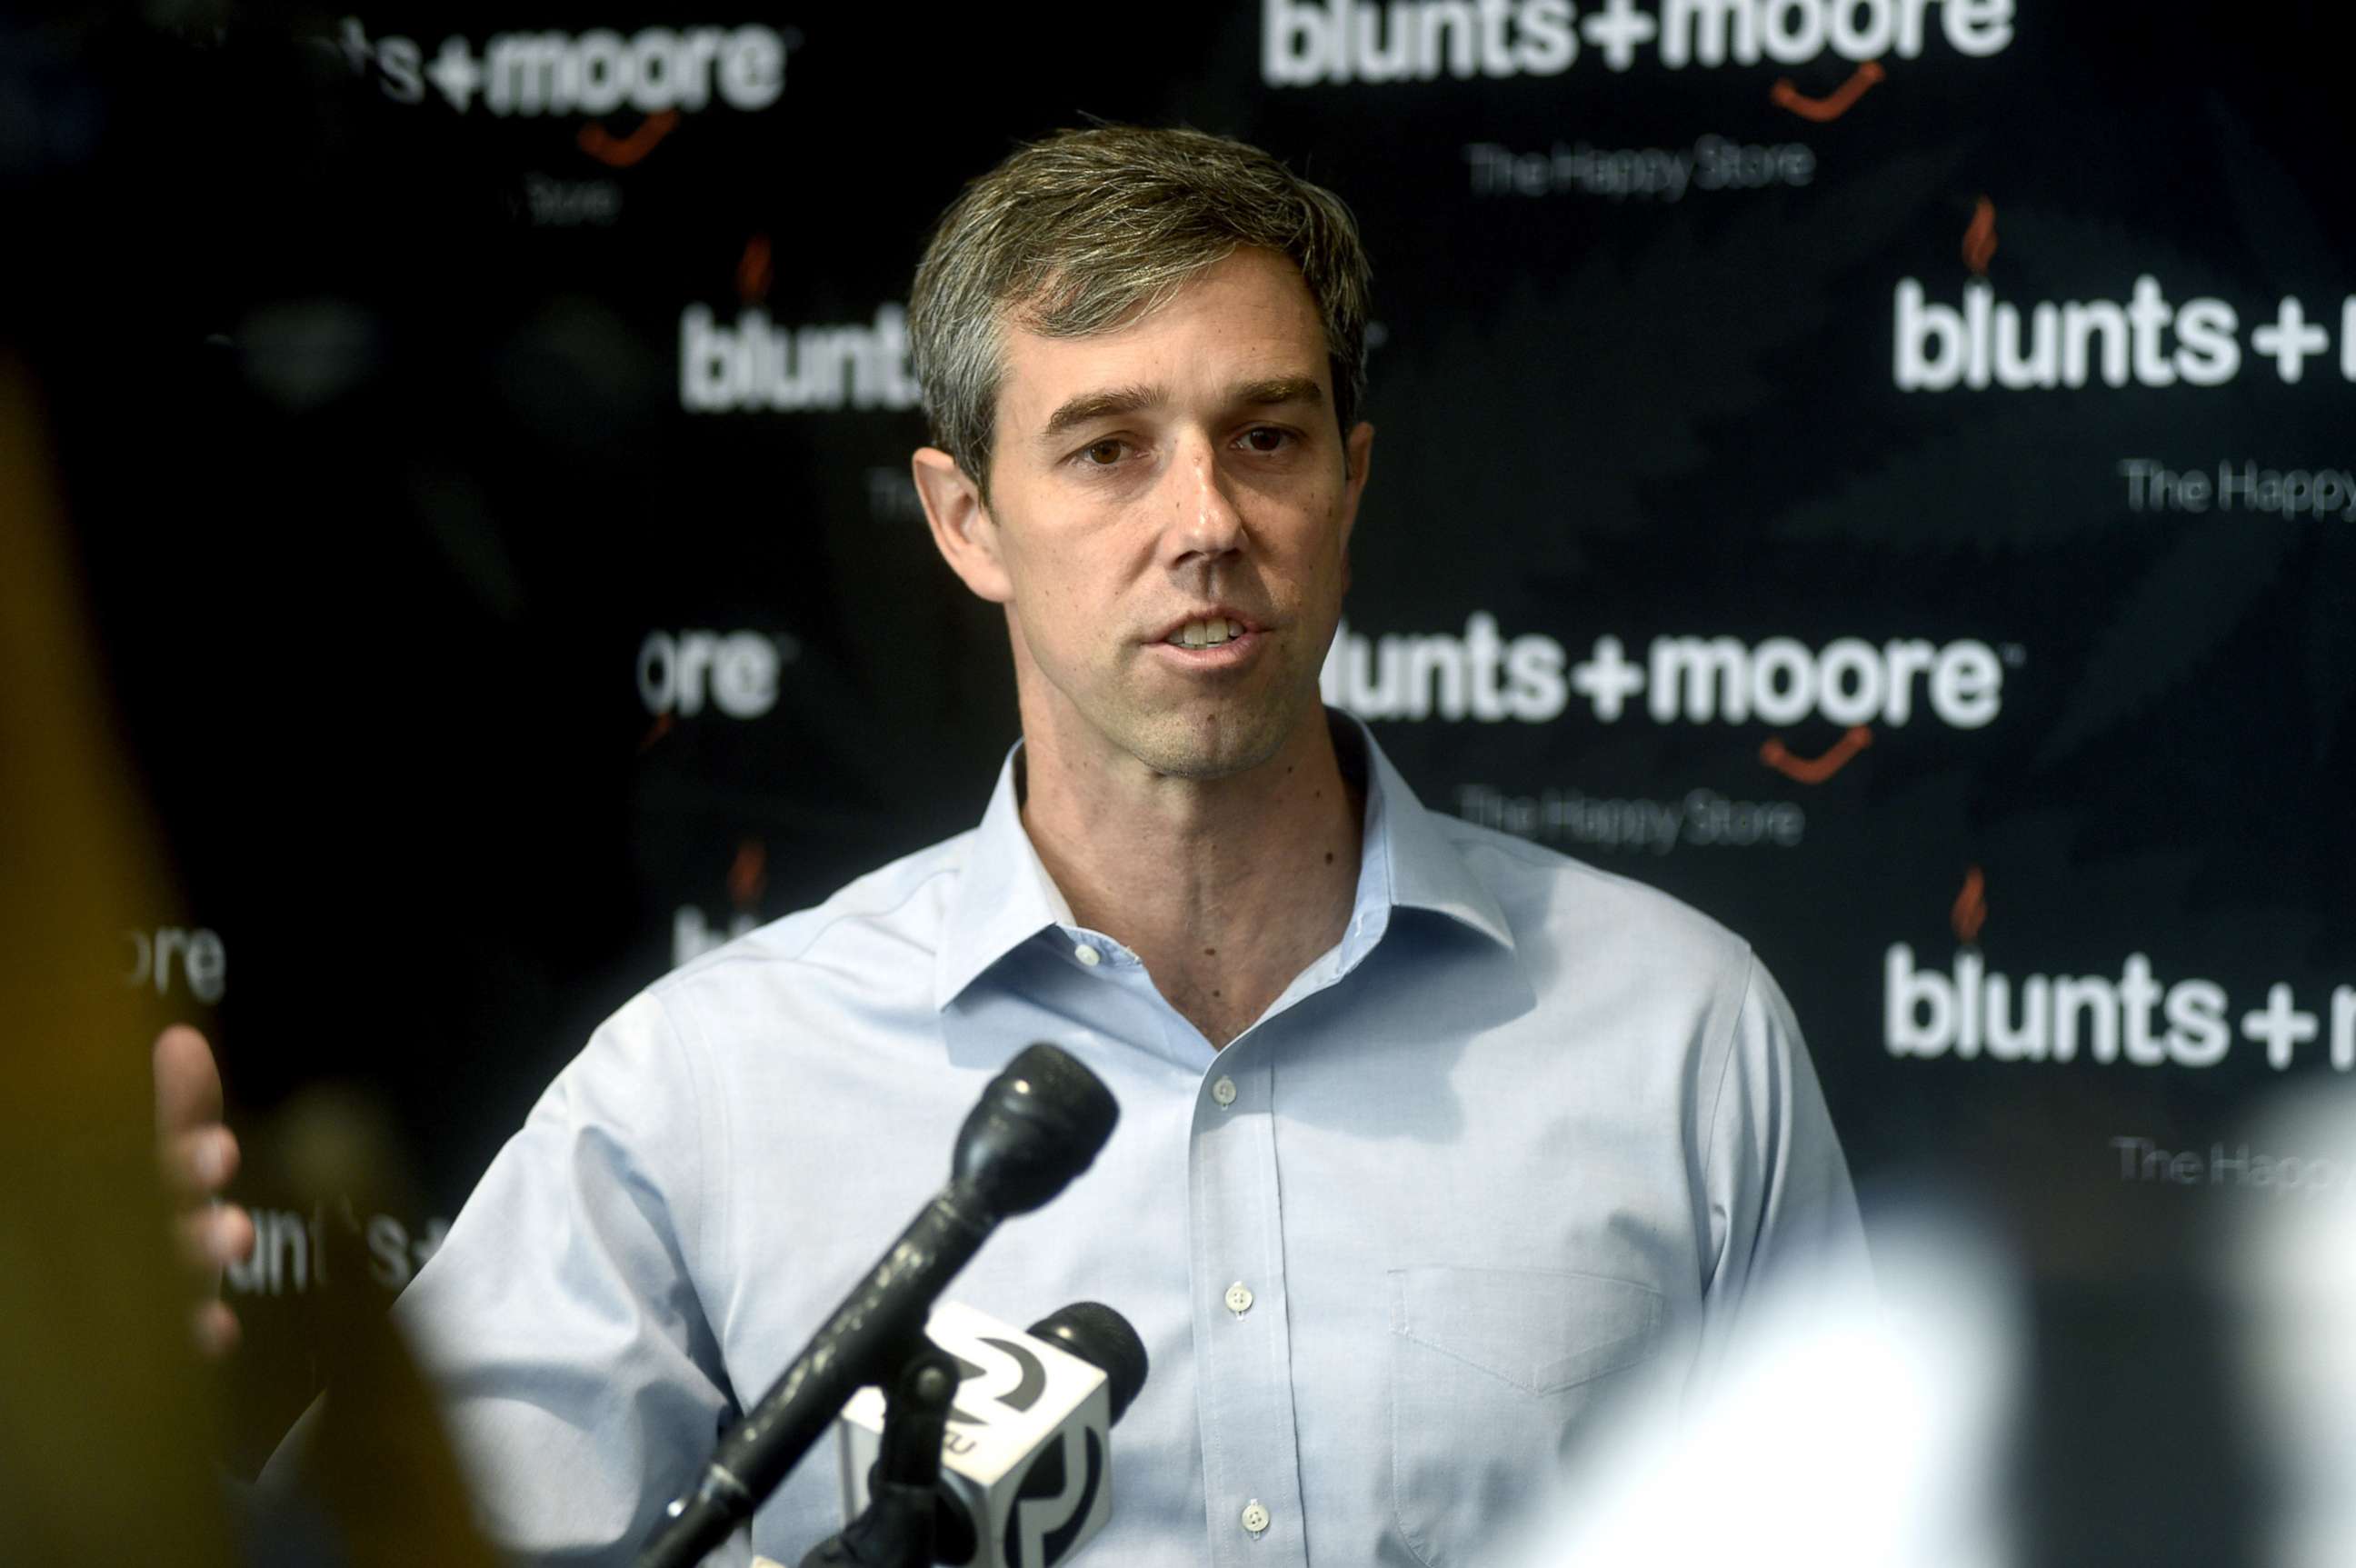 PHOTO: Democratic Presidential candidate Beto O'Rourke speaks at Blunts+Moore in Oakland, Calif., Sept. 19, 2019.